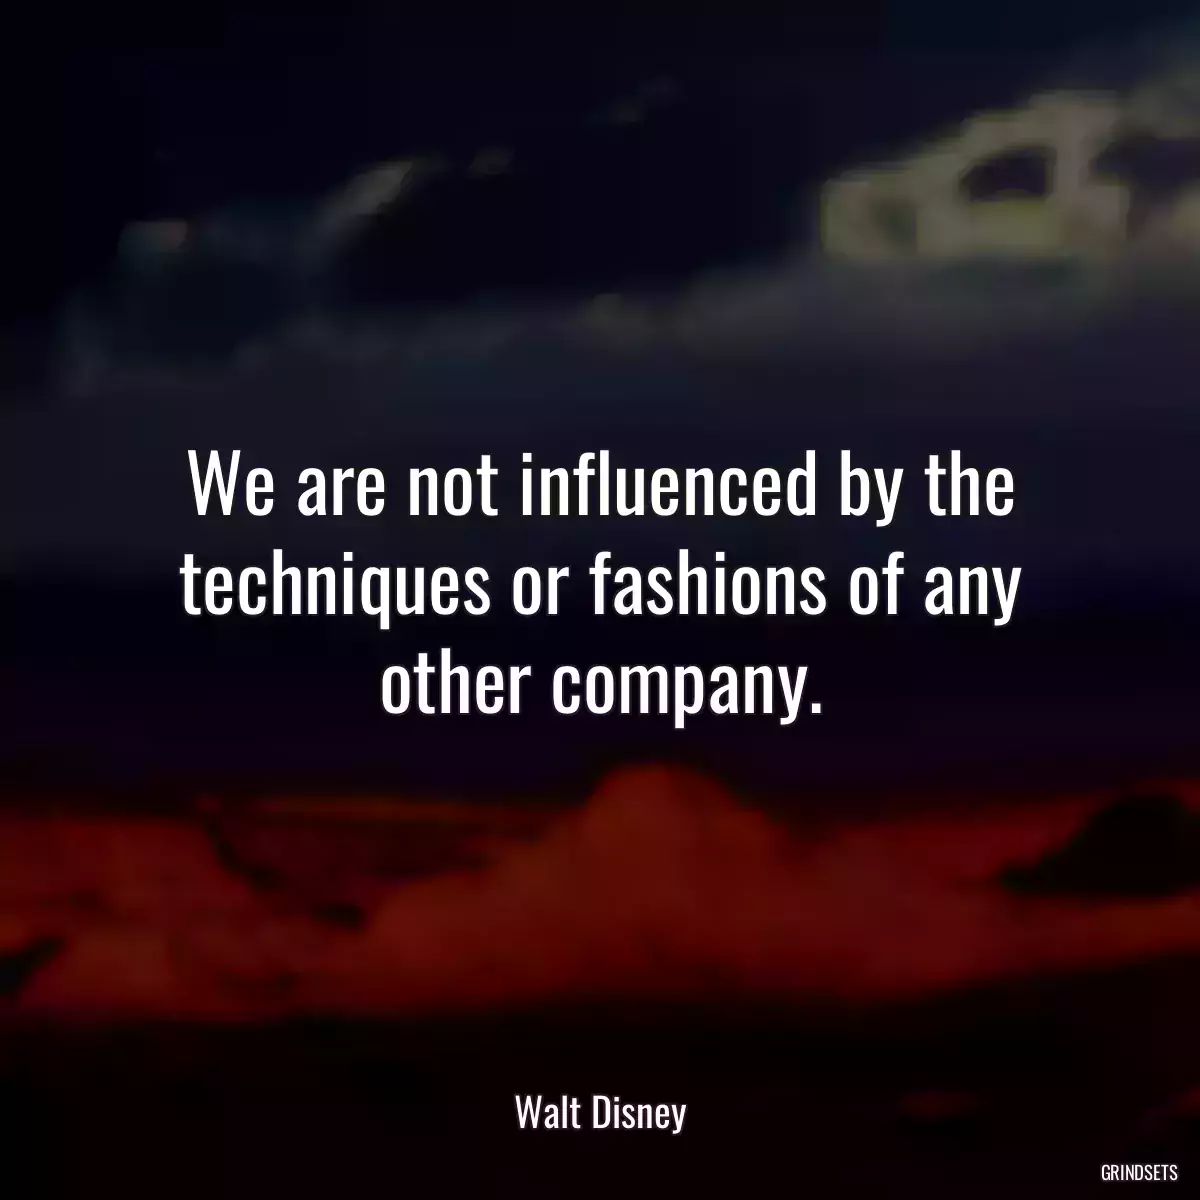 We are not influenced by the techniques or fashions of any other company.